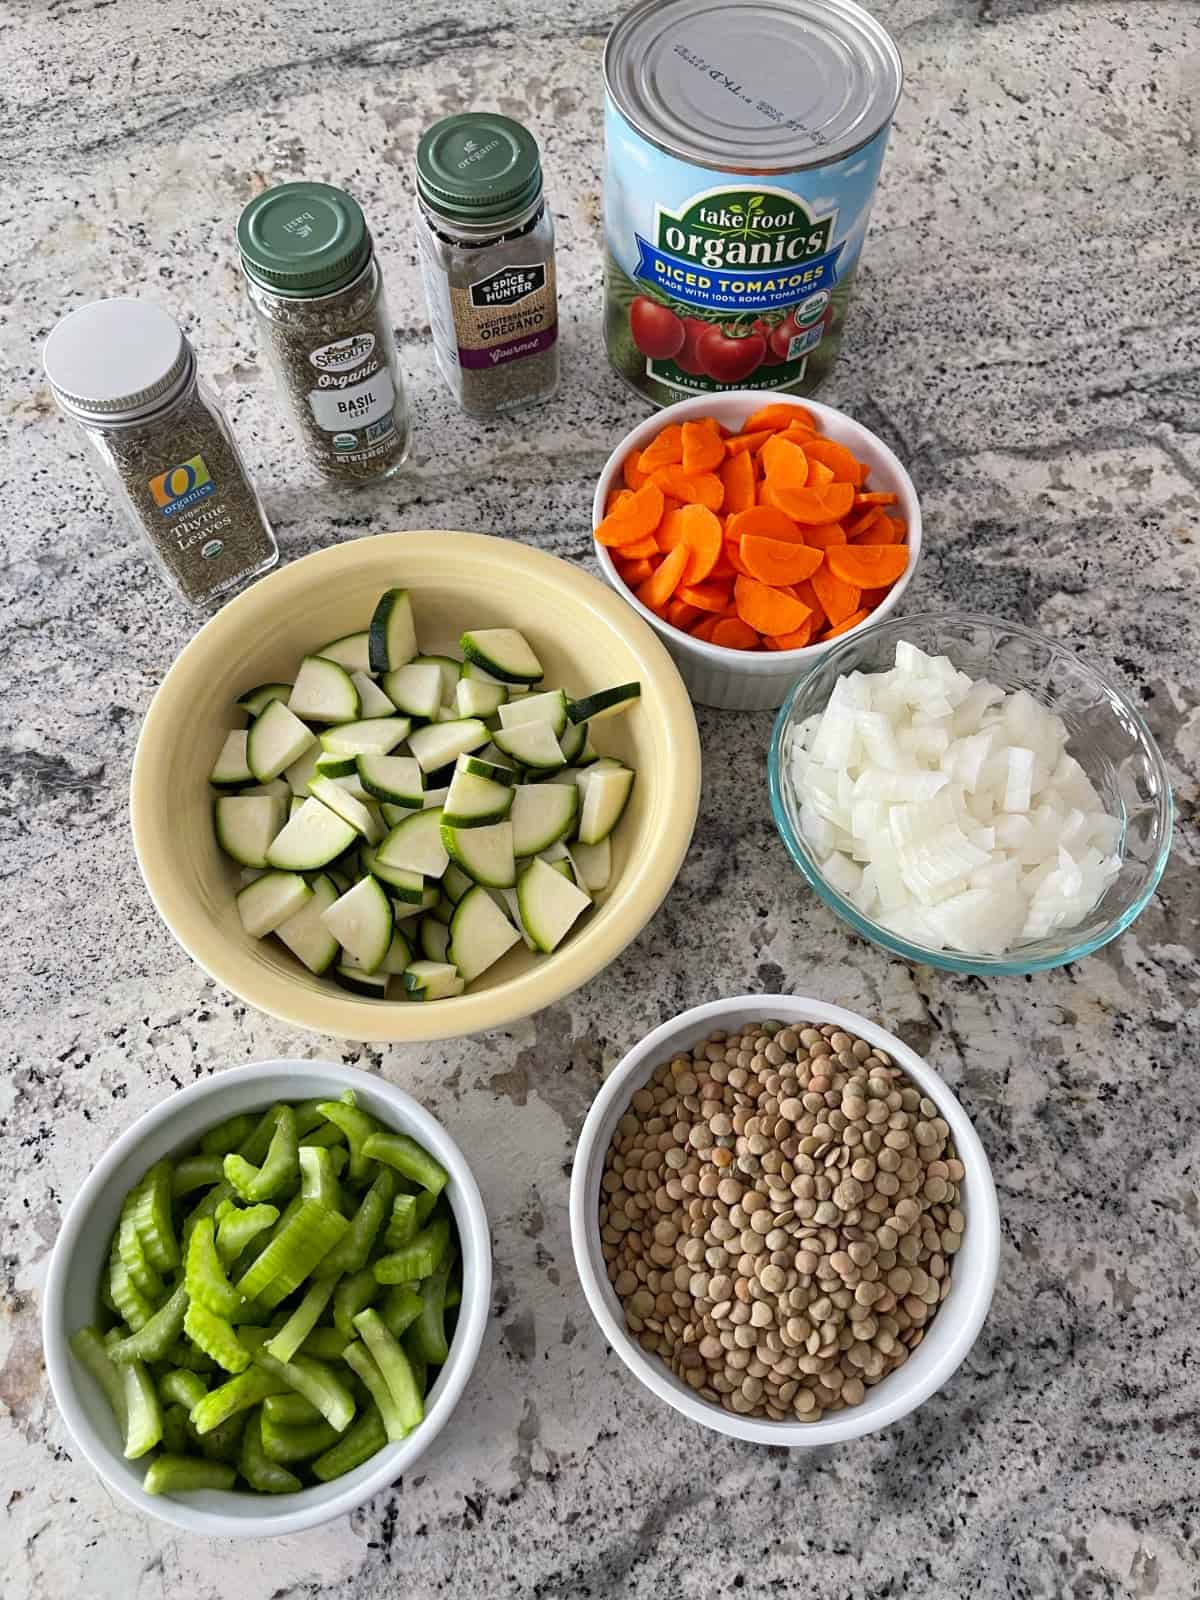 Ingredients including dry green lentils, chopped celery, carrots, zucchini and onions, canned diced tomatoes, dried basil, dried thyme and dried oregano on granite.